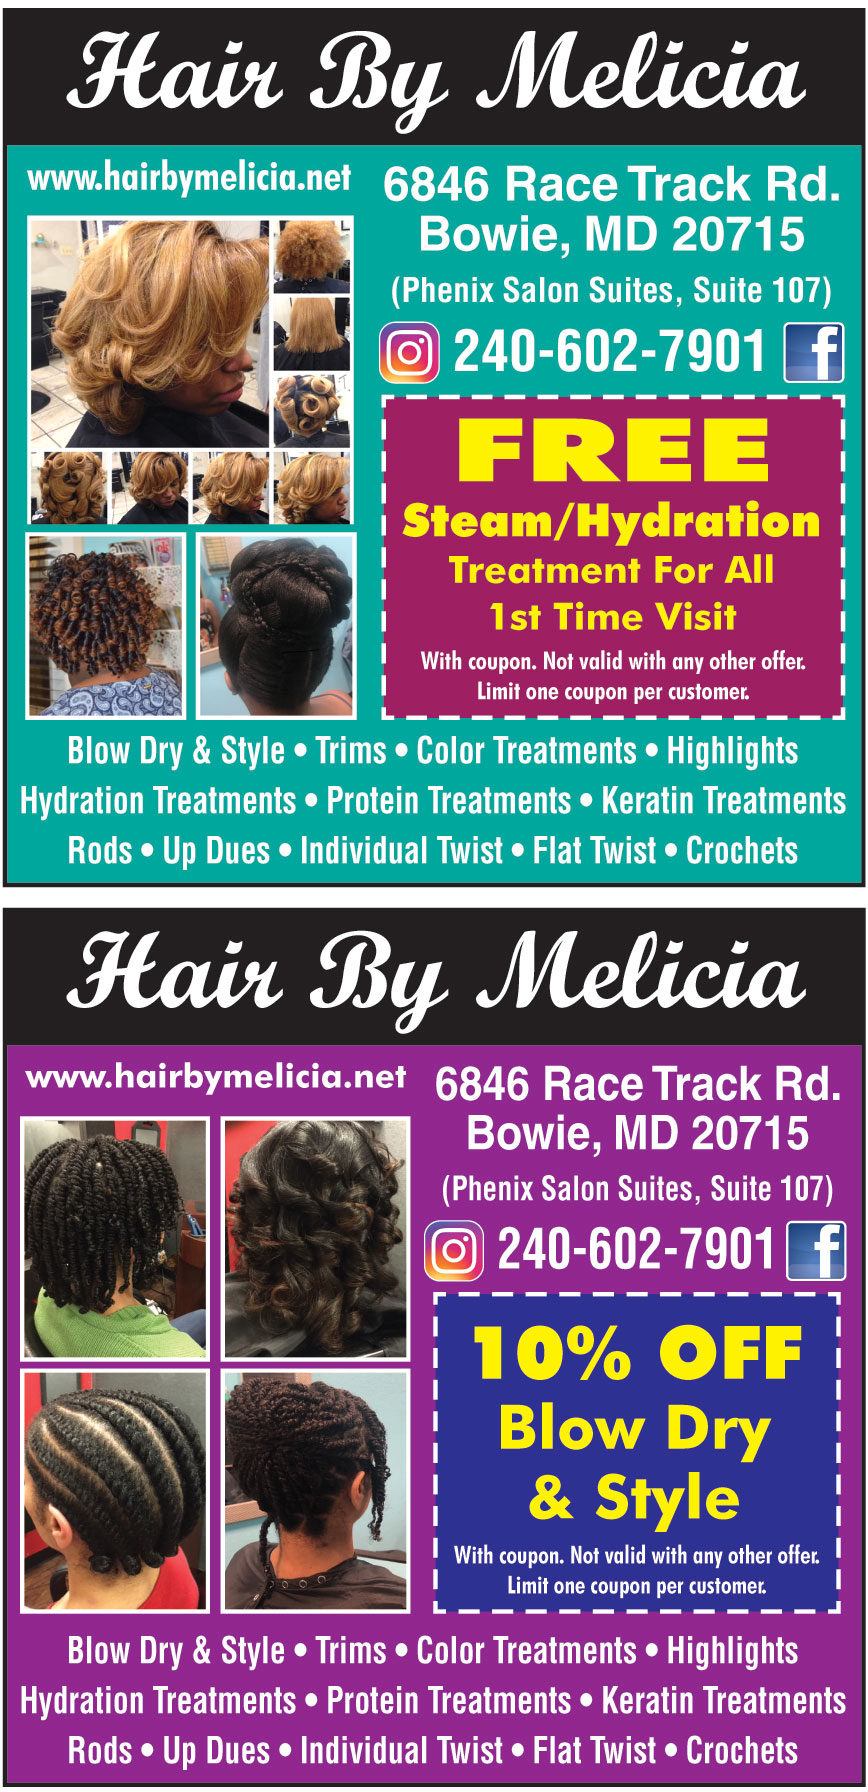 HAIR BY MELICIA